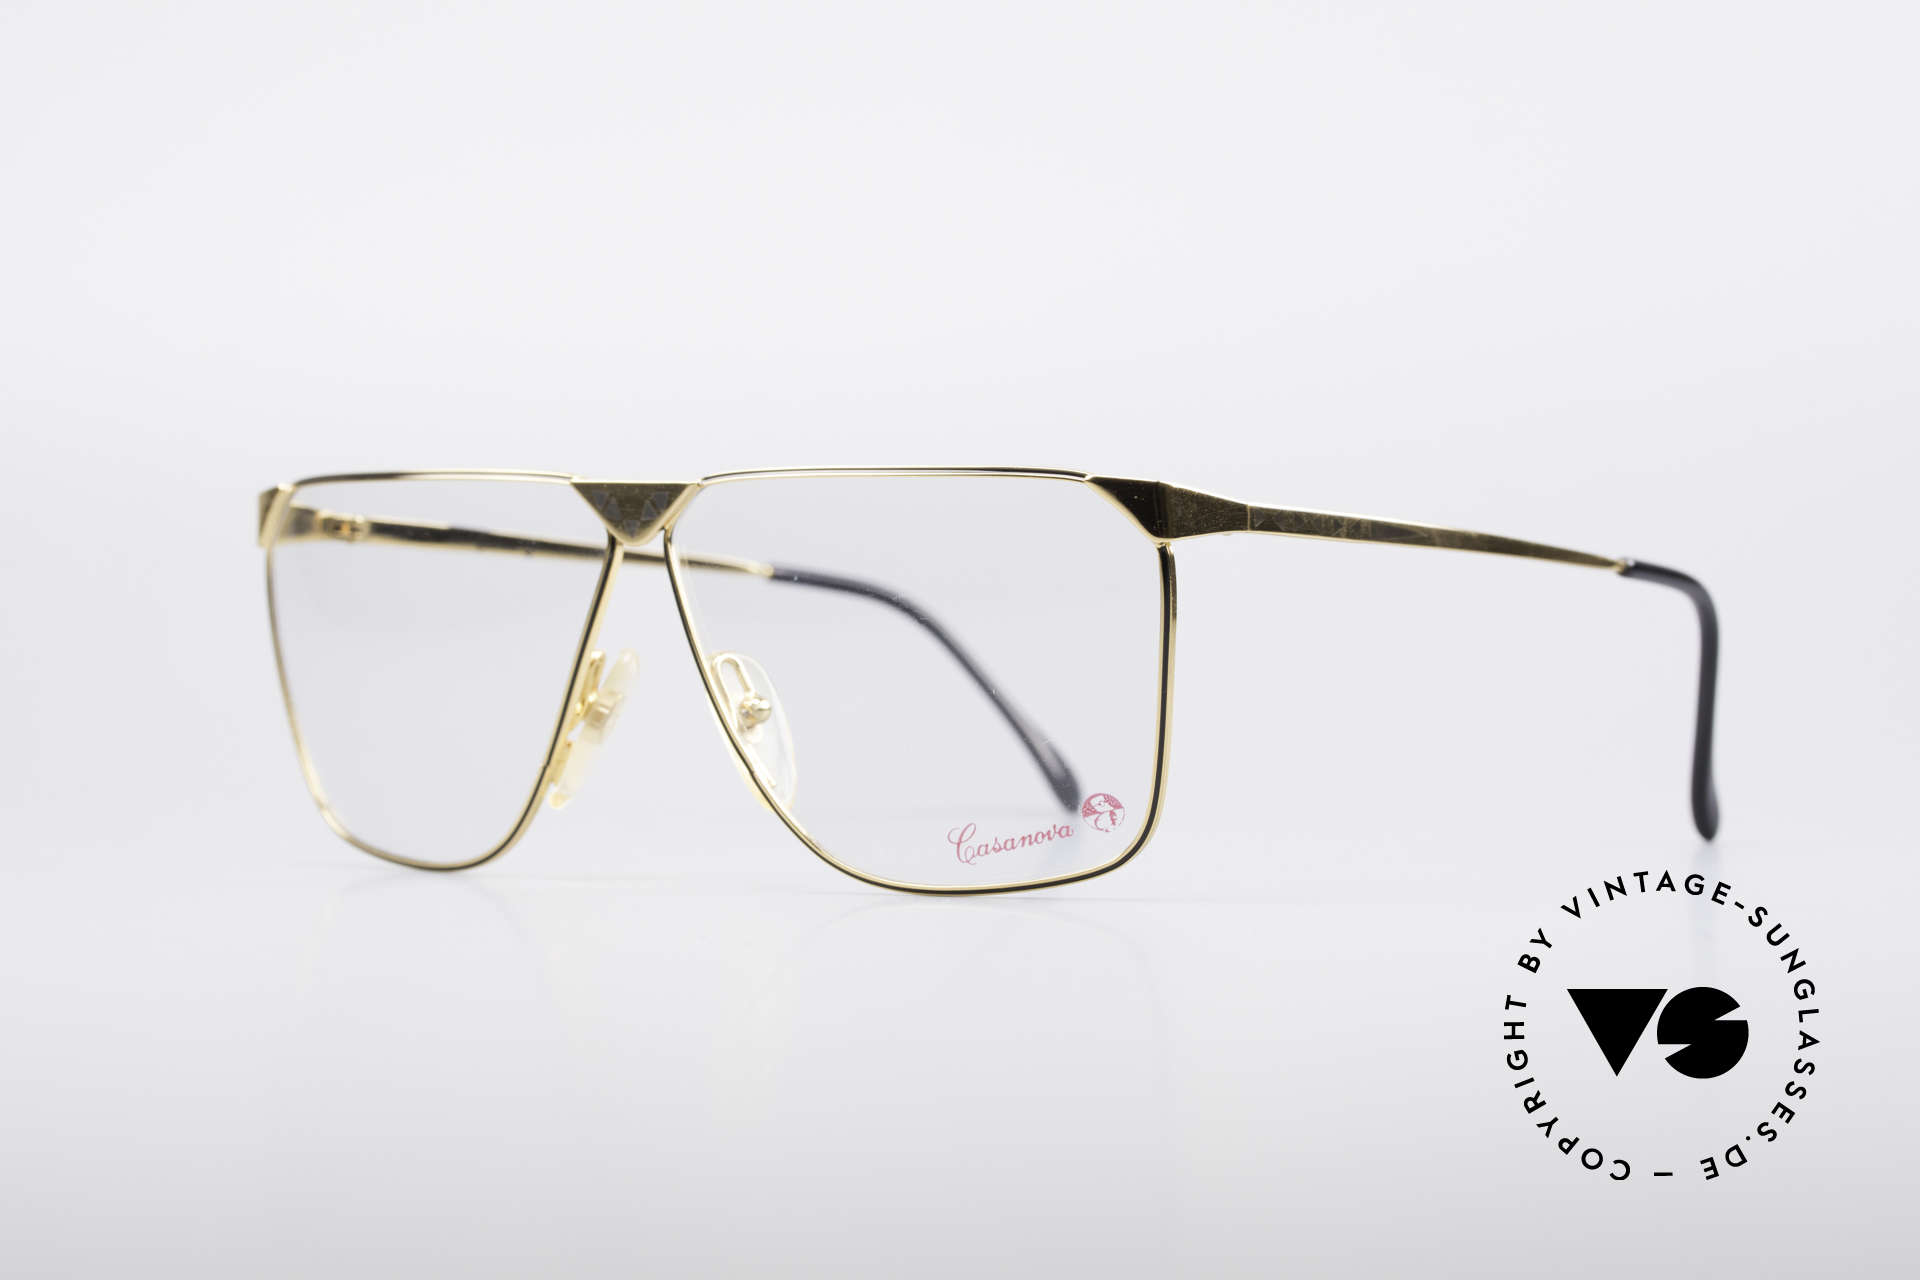 Casanova NM9 No Retro 80's Vintage Glasses, with black pattern on the front and on the temples, Made for Men